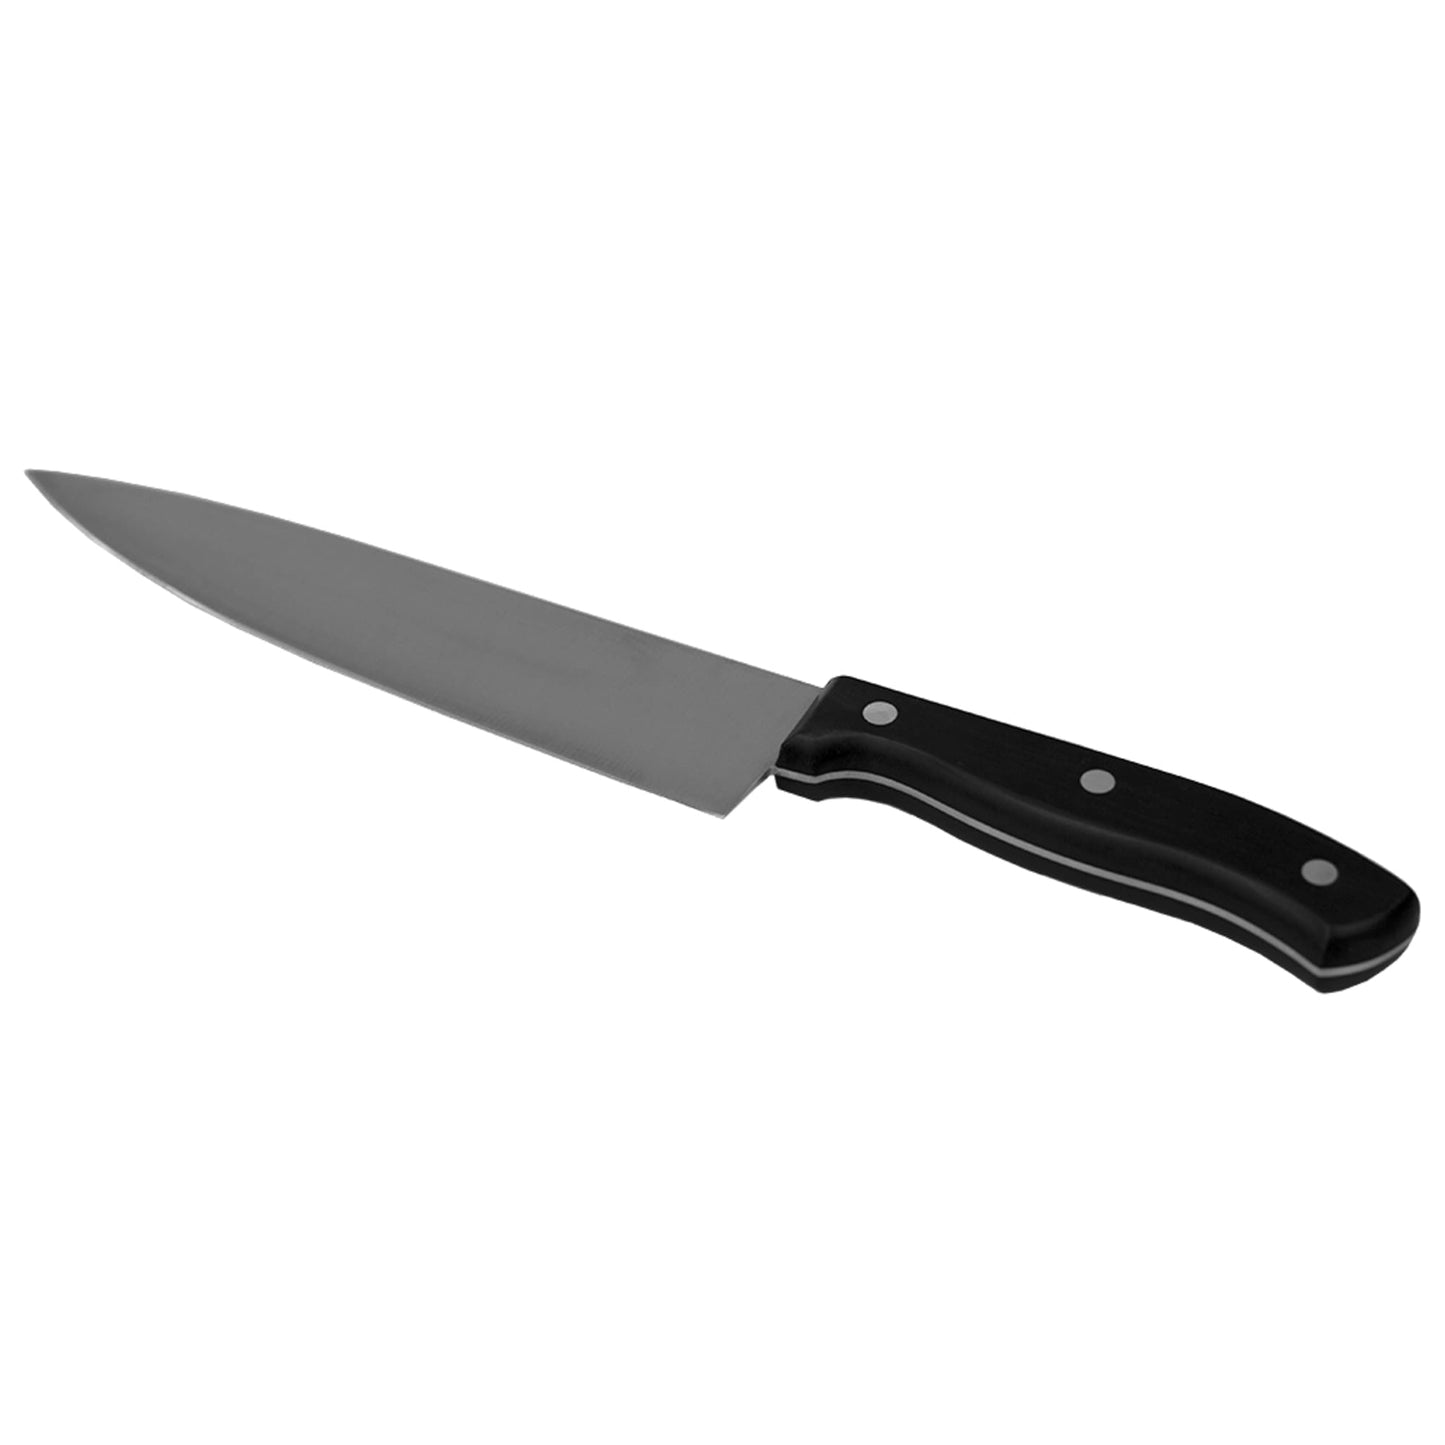 8" Stainless Steel Chef Knife with Contoured Bakelite Handle, Black